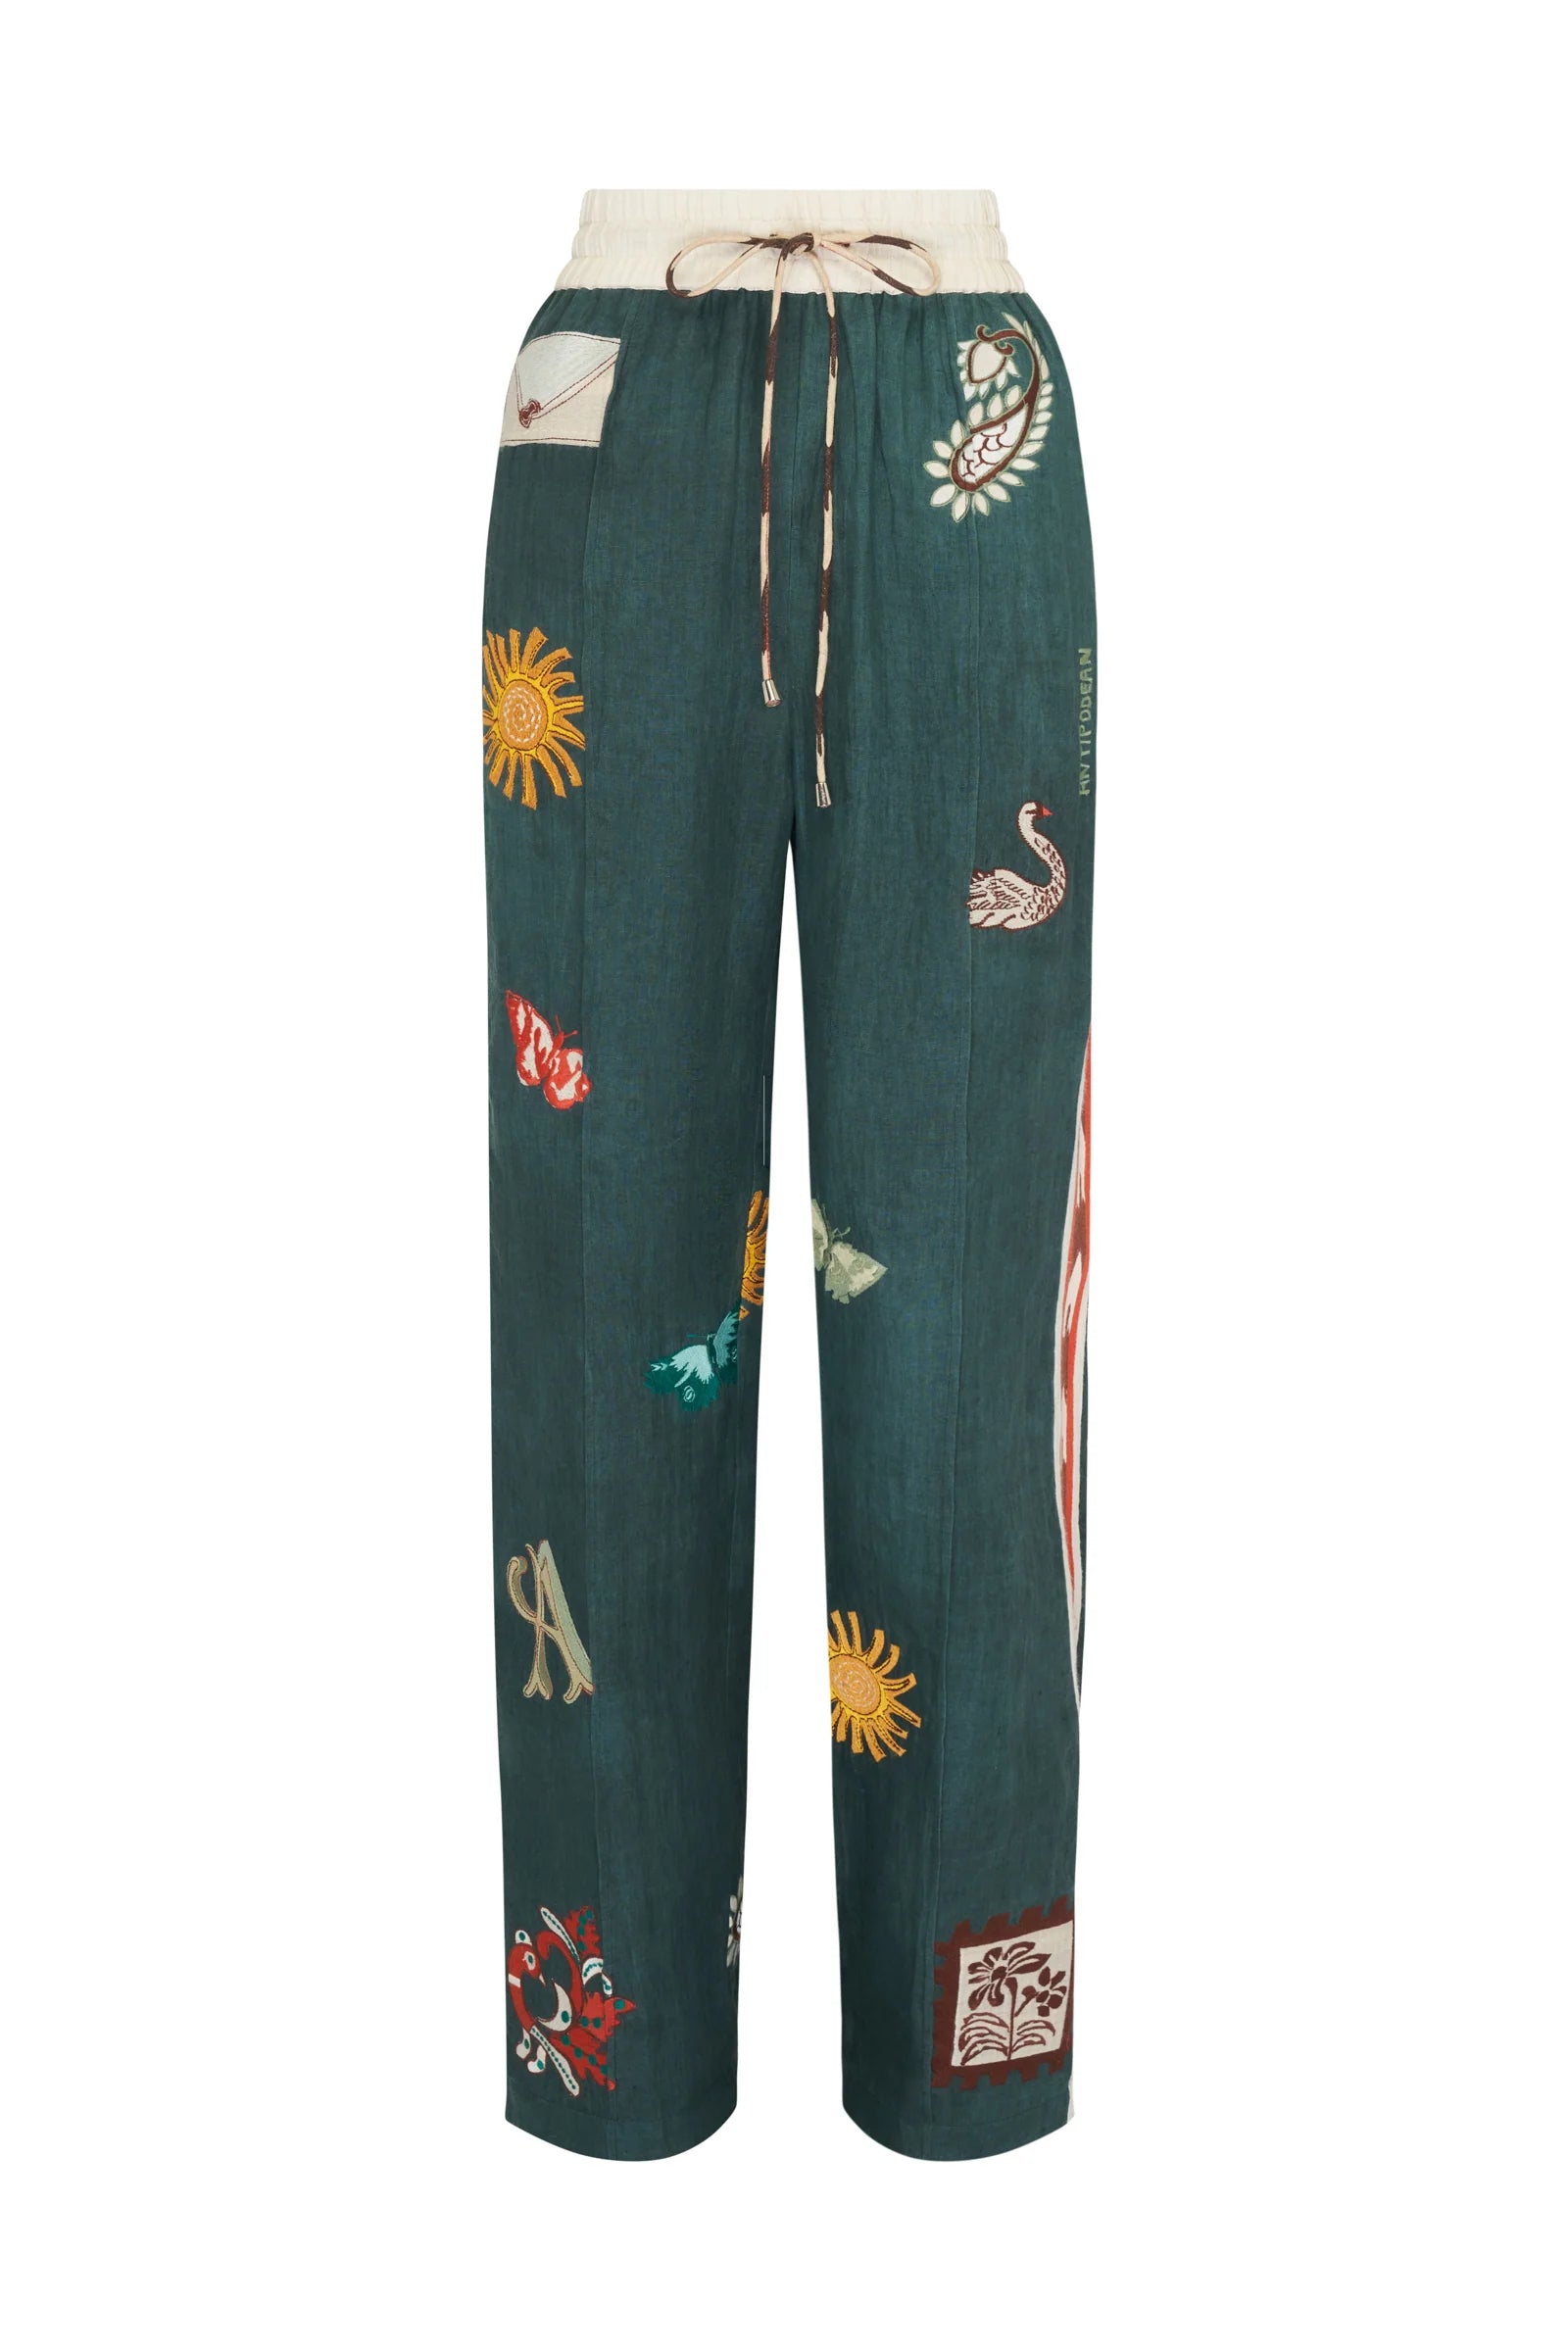 Antipodean Quincy Track Pant - Peacock